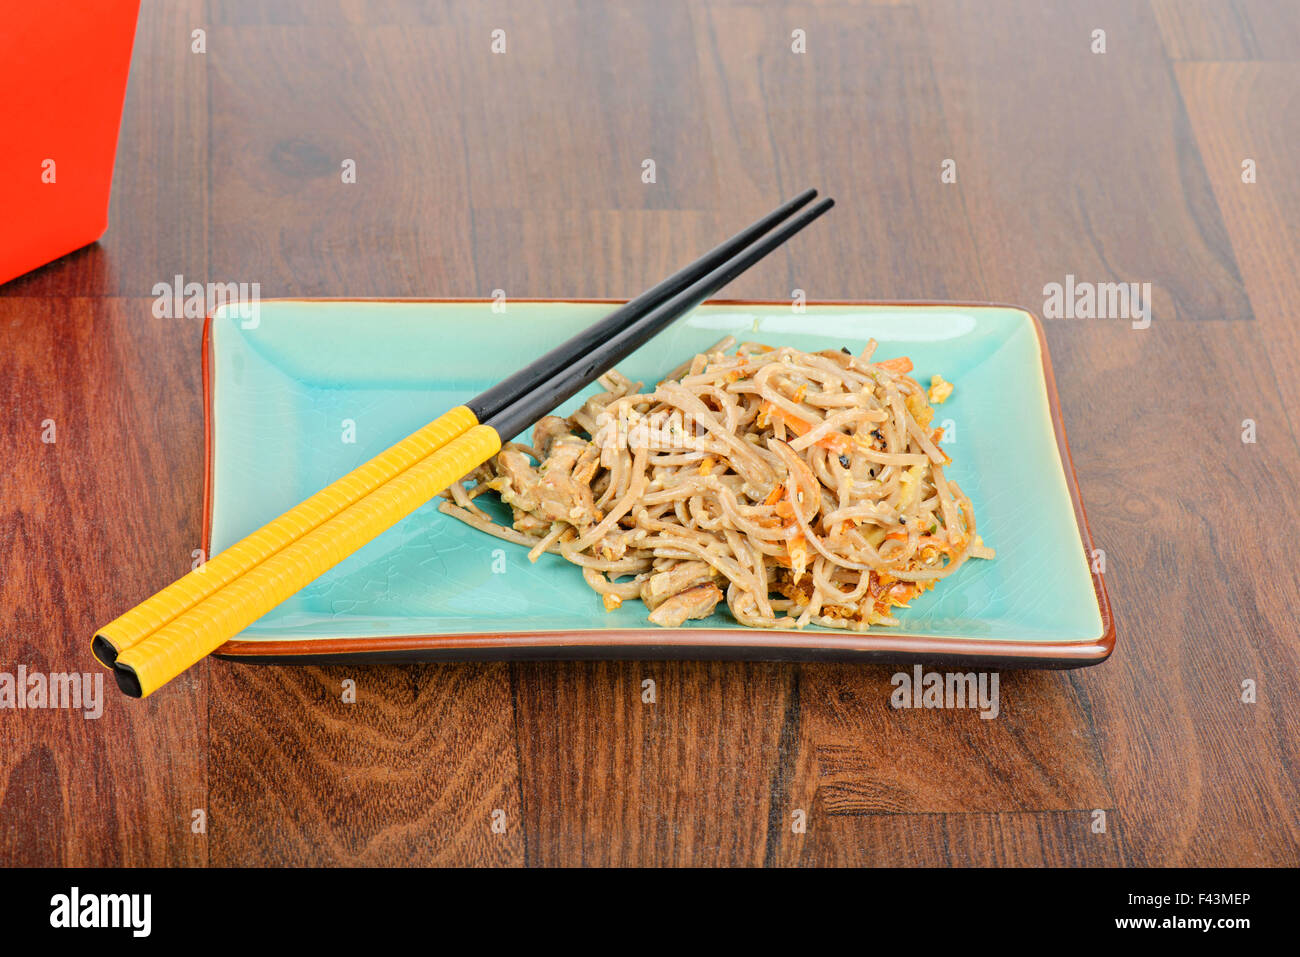 Meat and noodles in red take away container Stock Photo